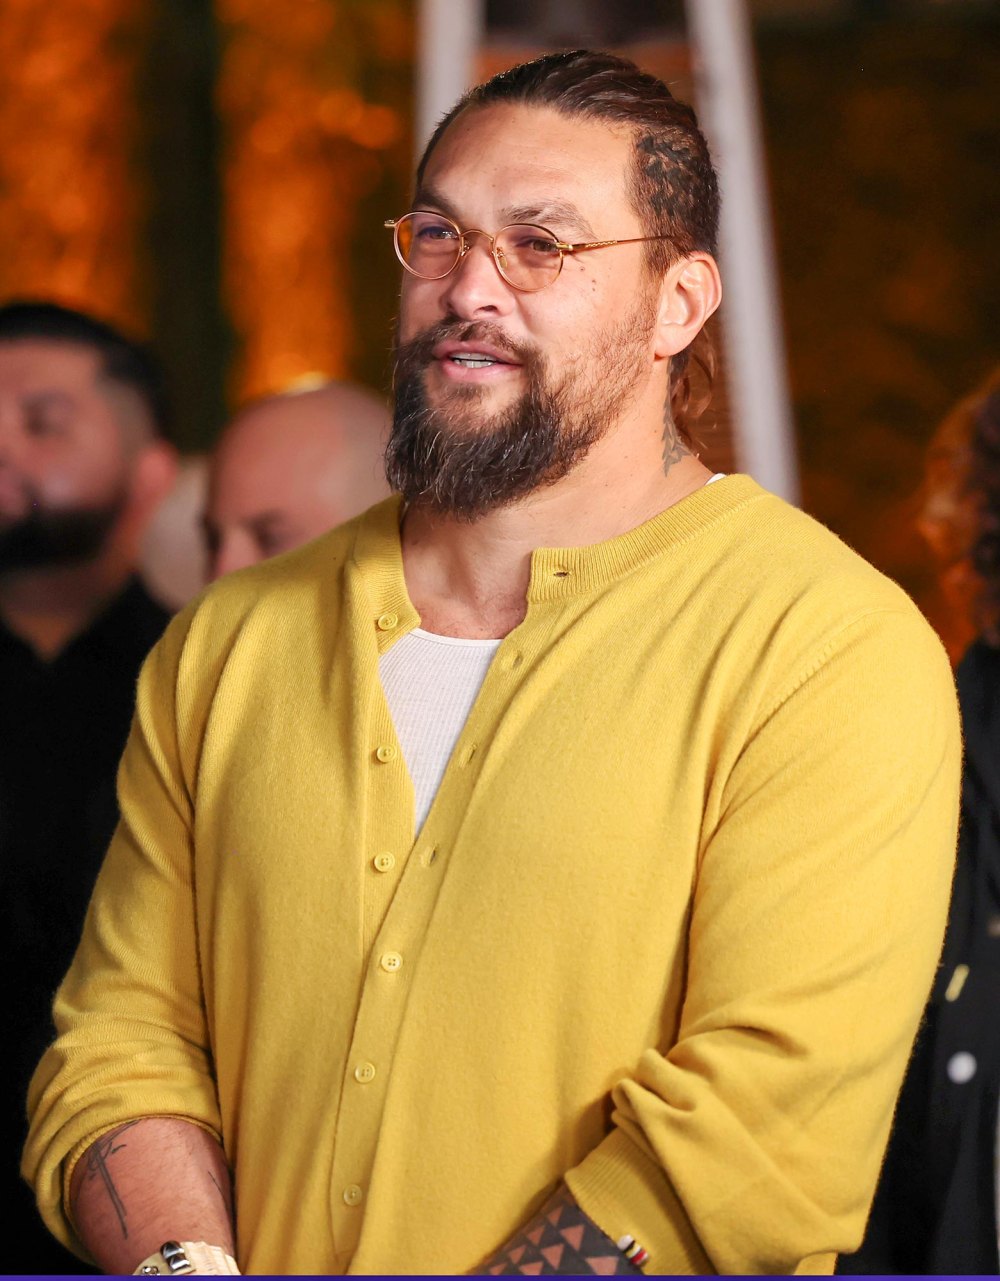 Jason Momoa Spends a Night Out With His 2 Kids After Finalizing Lisa Bonet Divorce